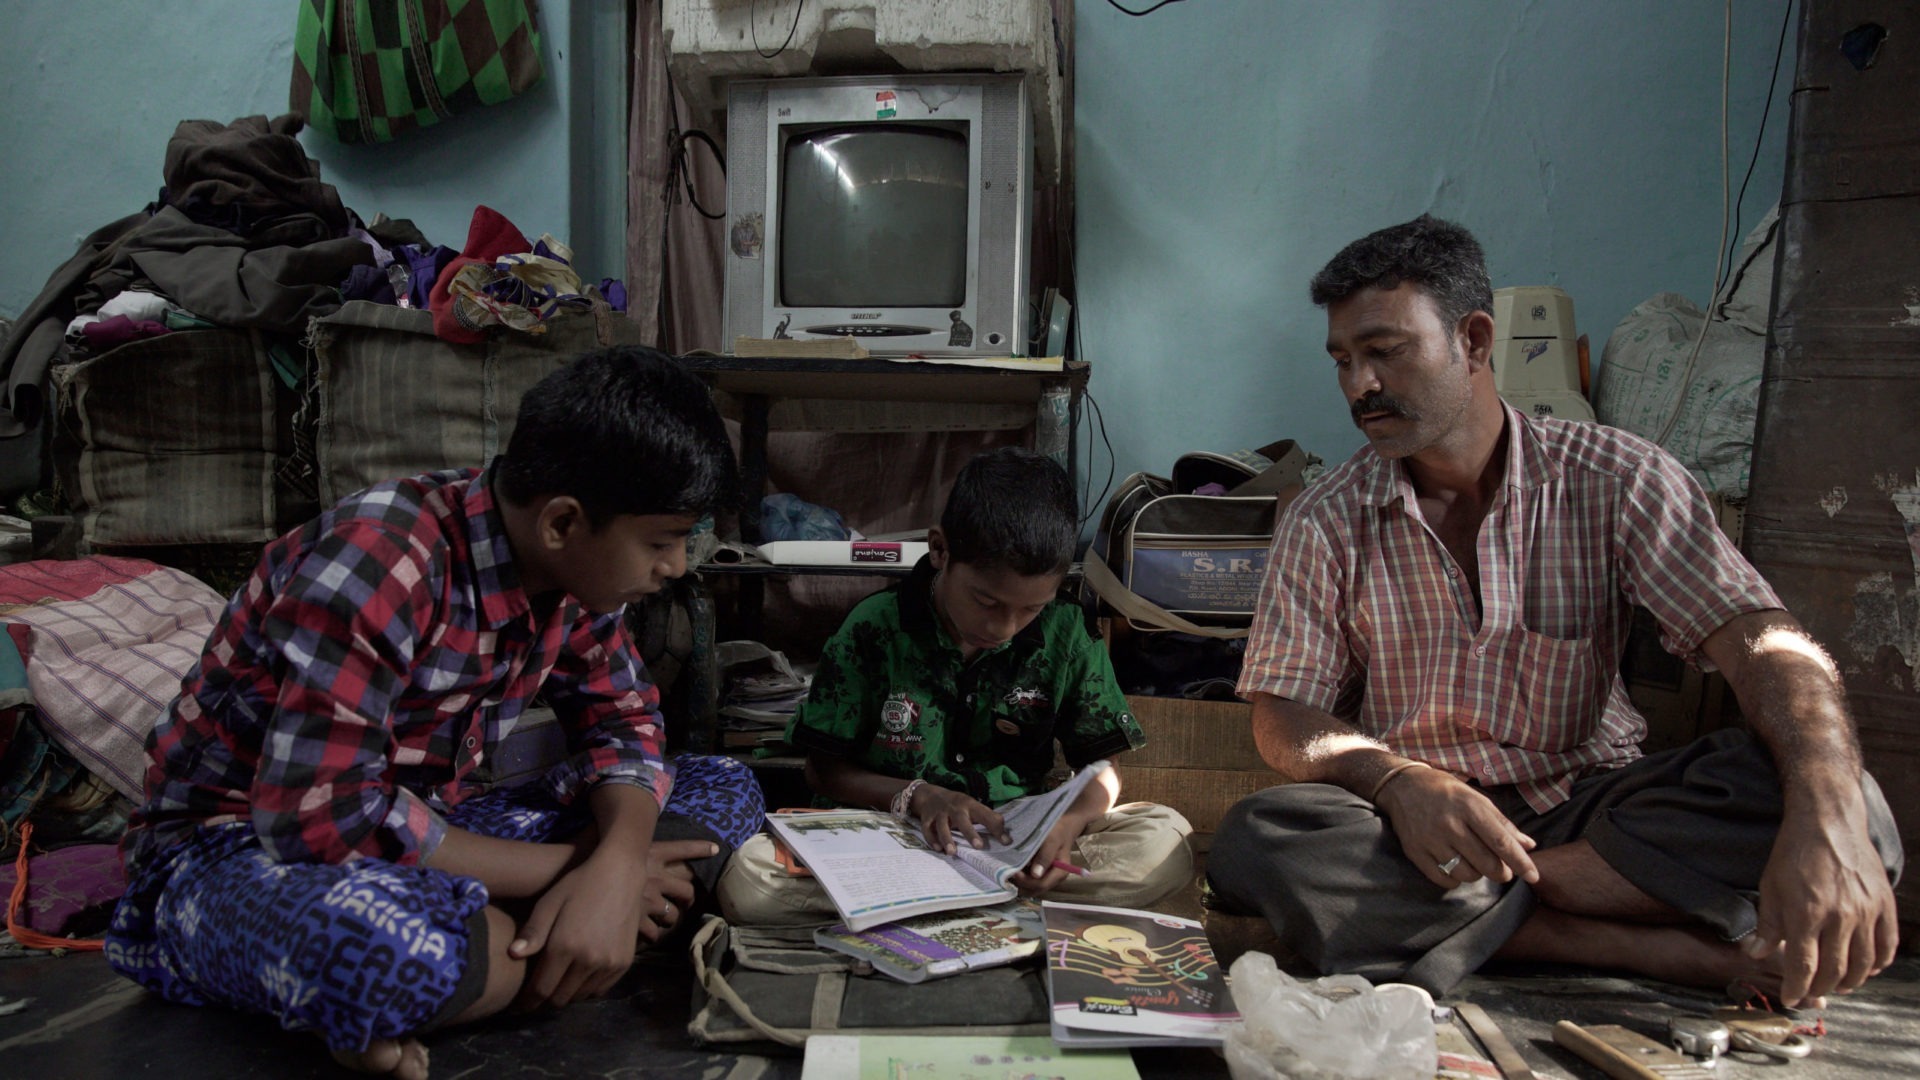 A father in India studying at home with his sons